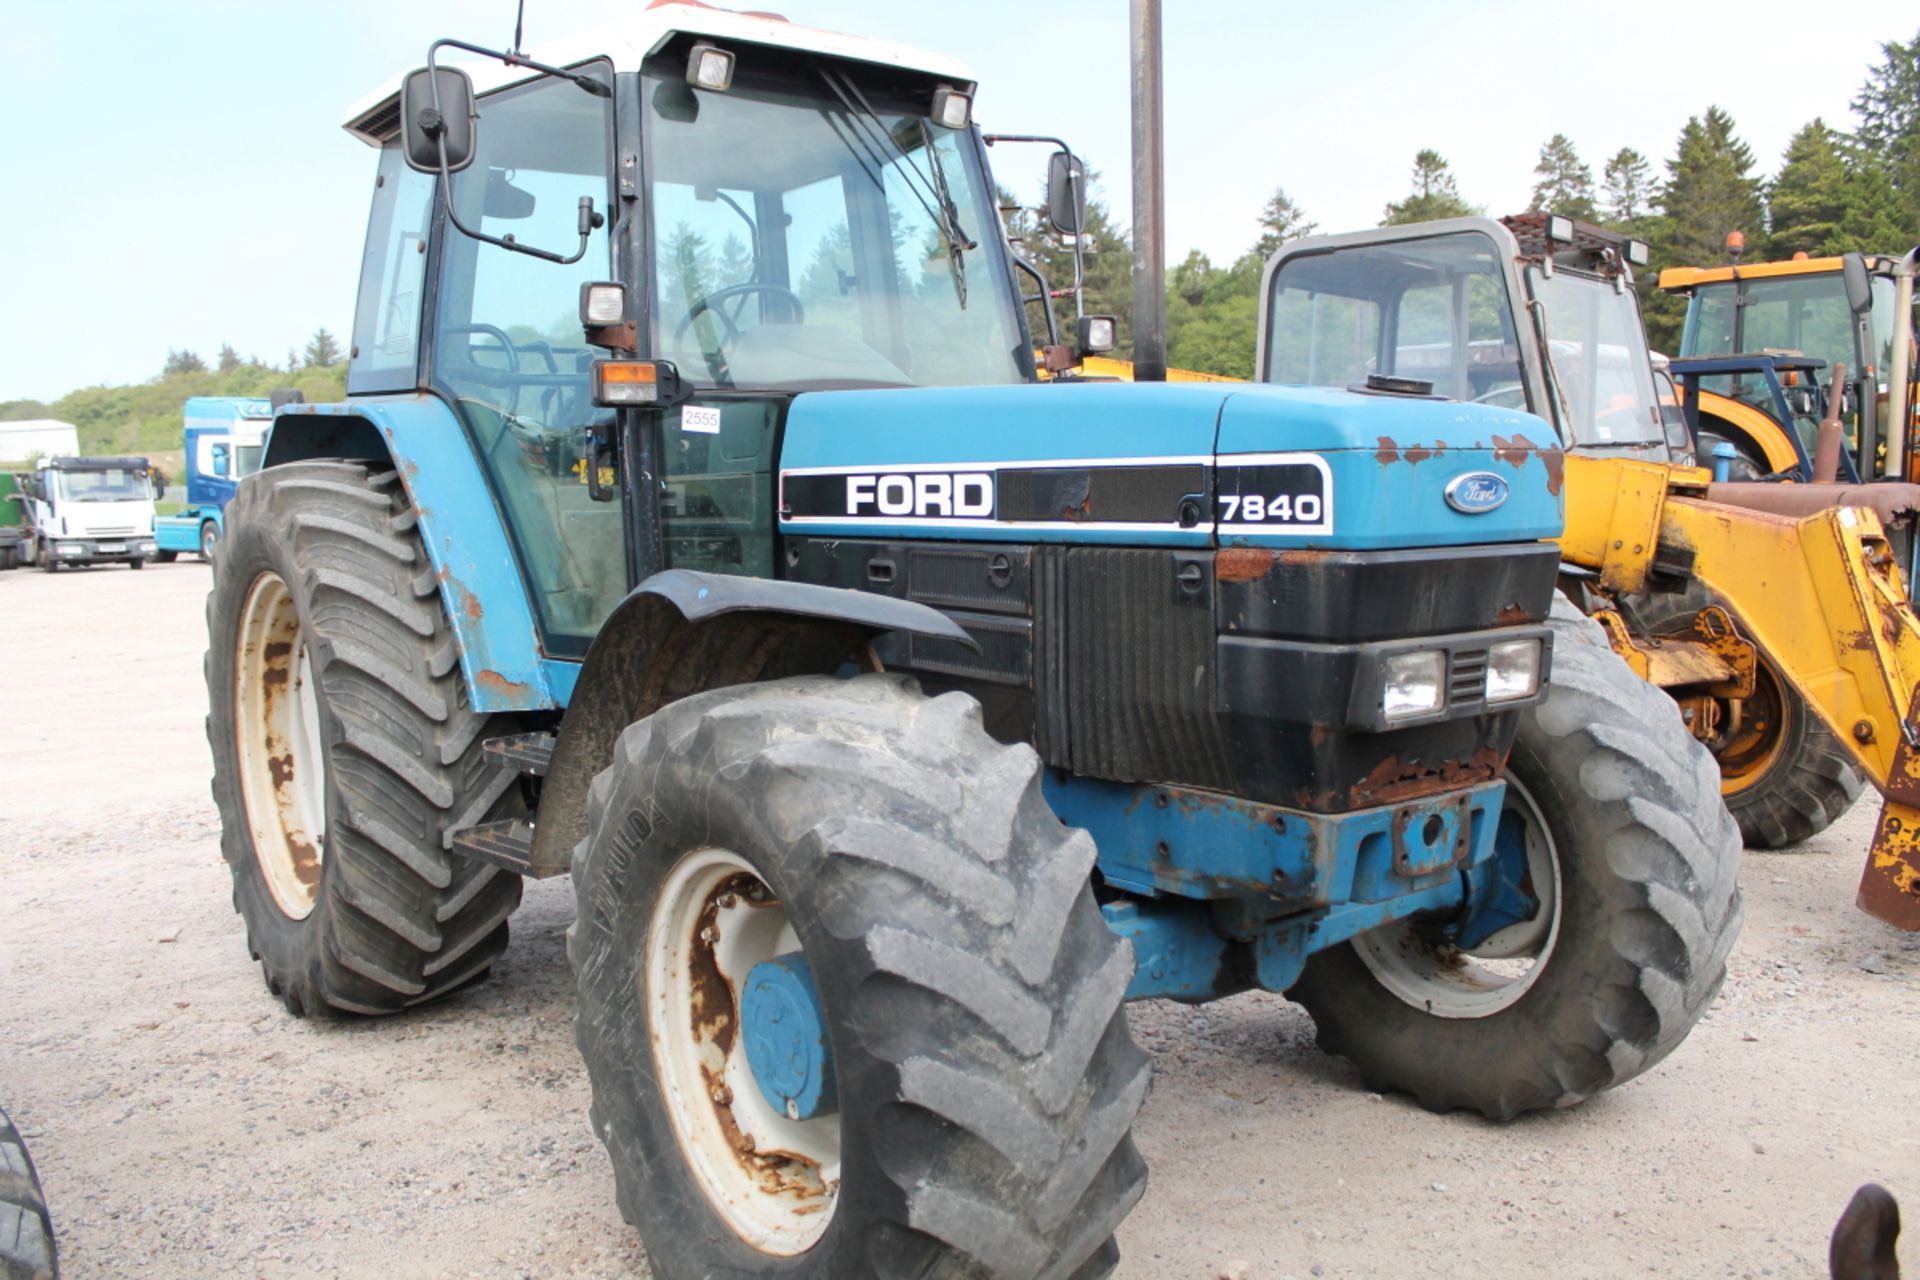 Ford New Holland 7840 - 0cc Tractor